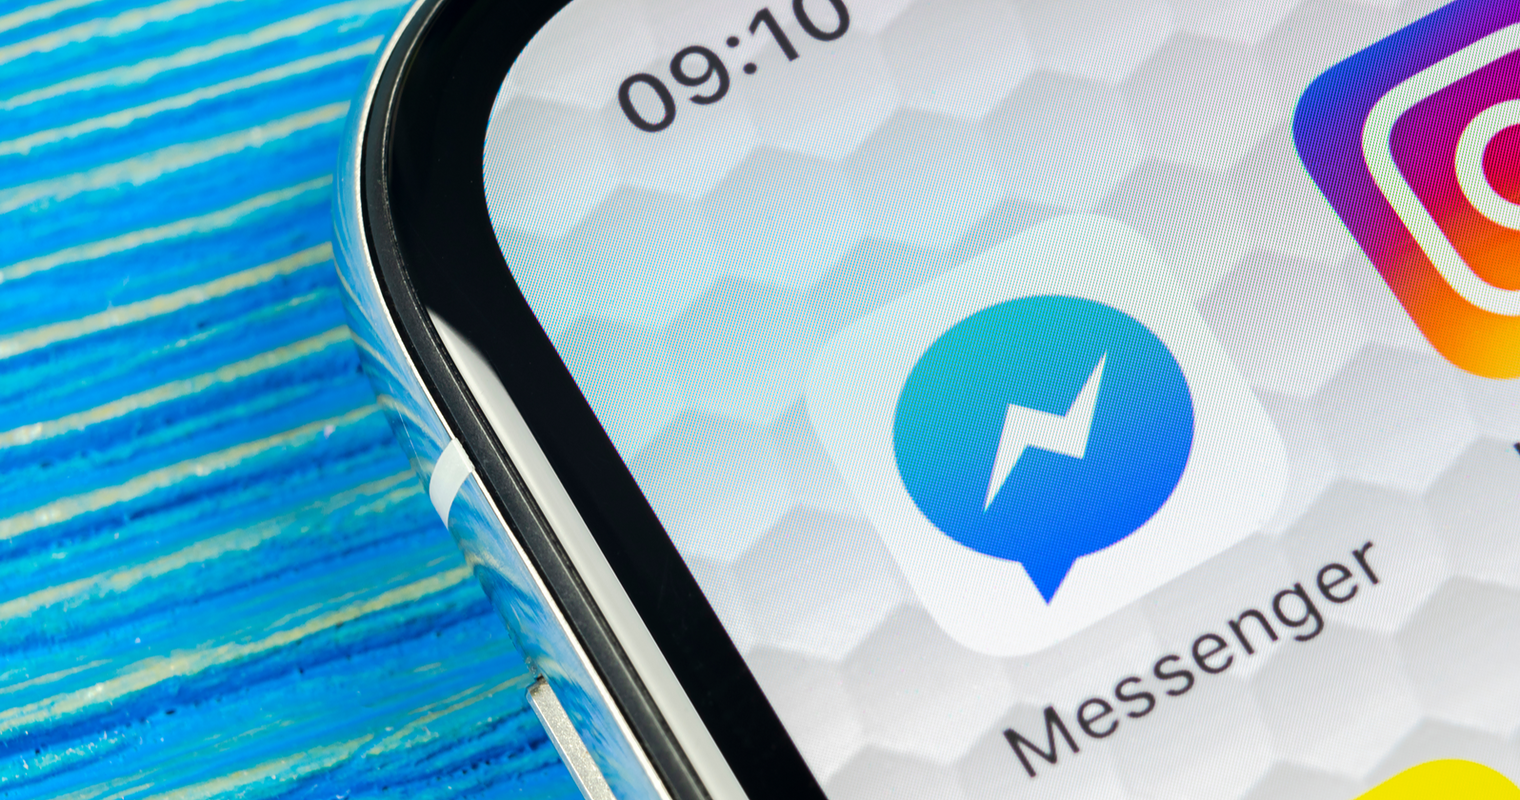 How to Prepare for 5 Changes Coming to Facebook Messenger